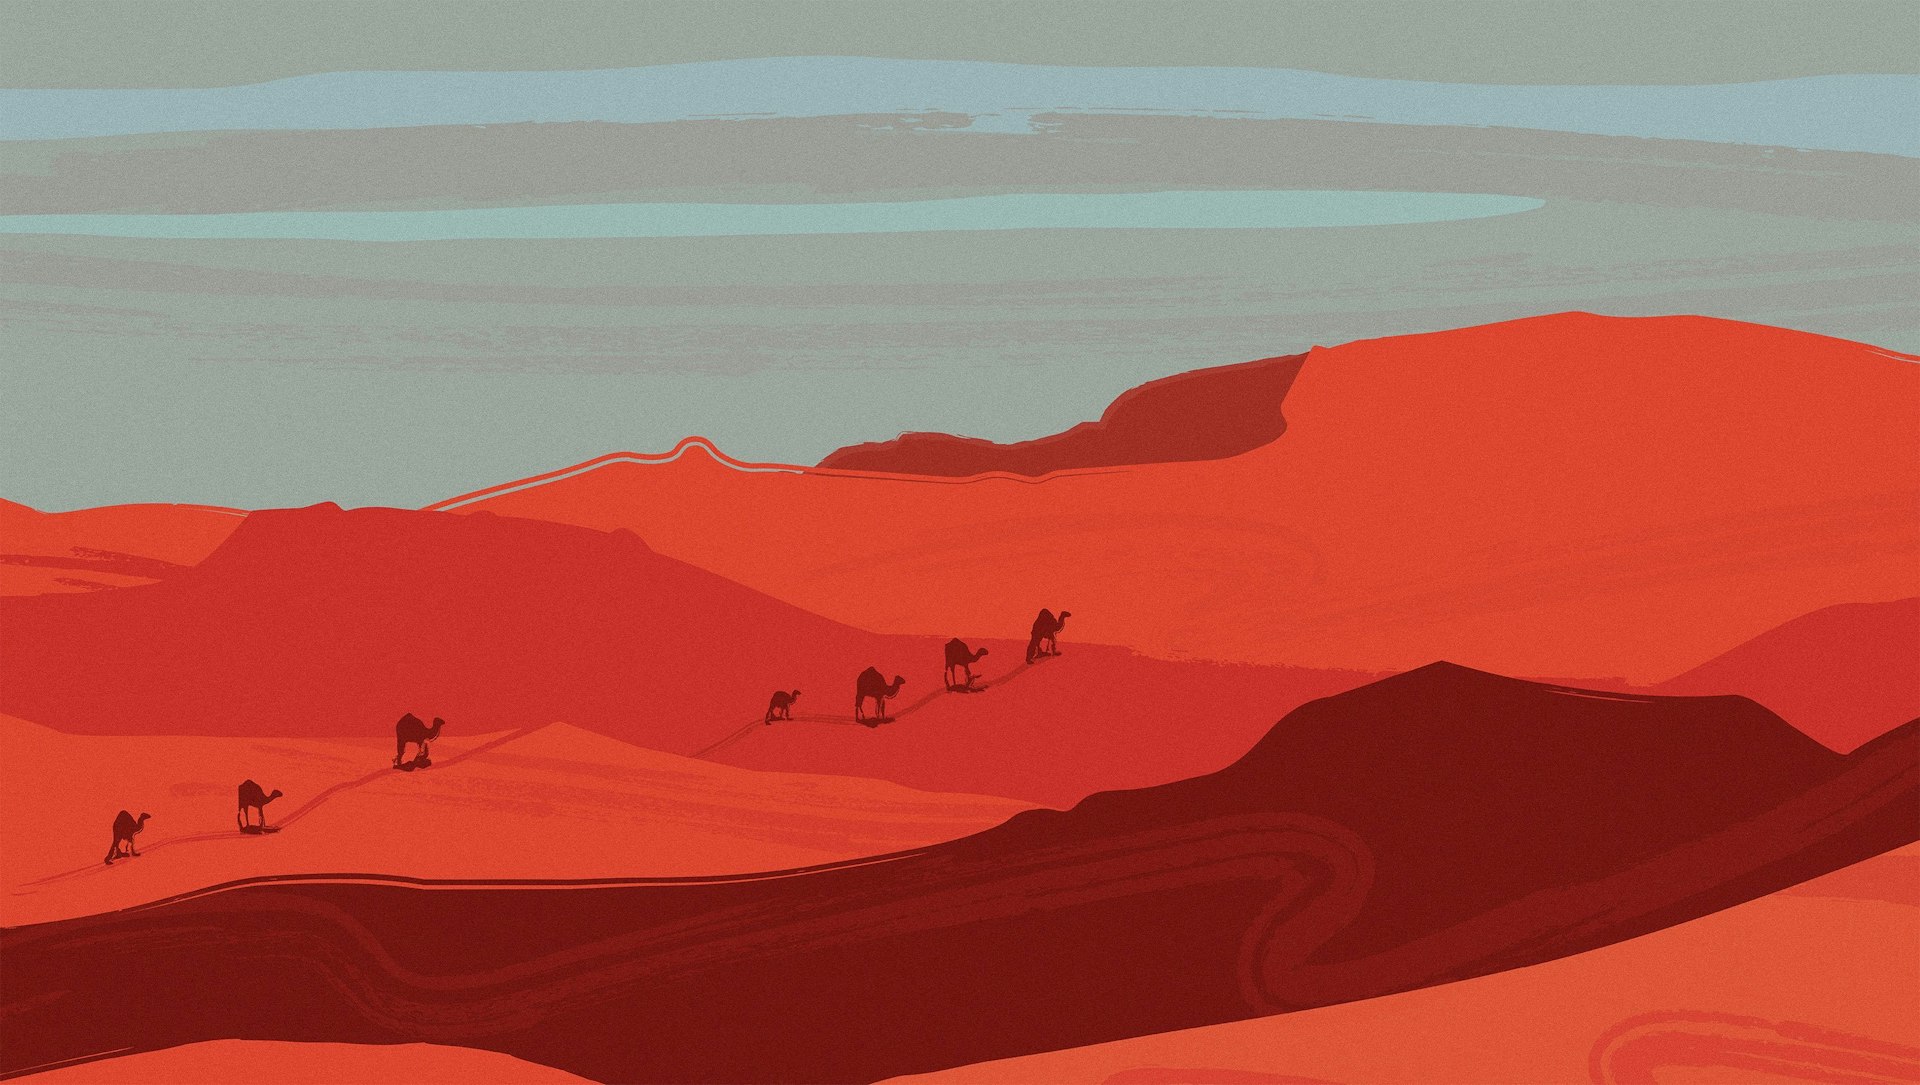 Unravelling the mysteries of the world’s deserts